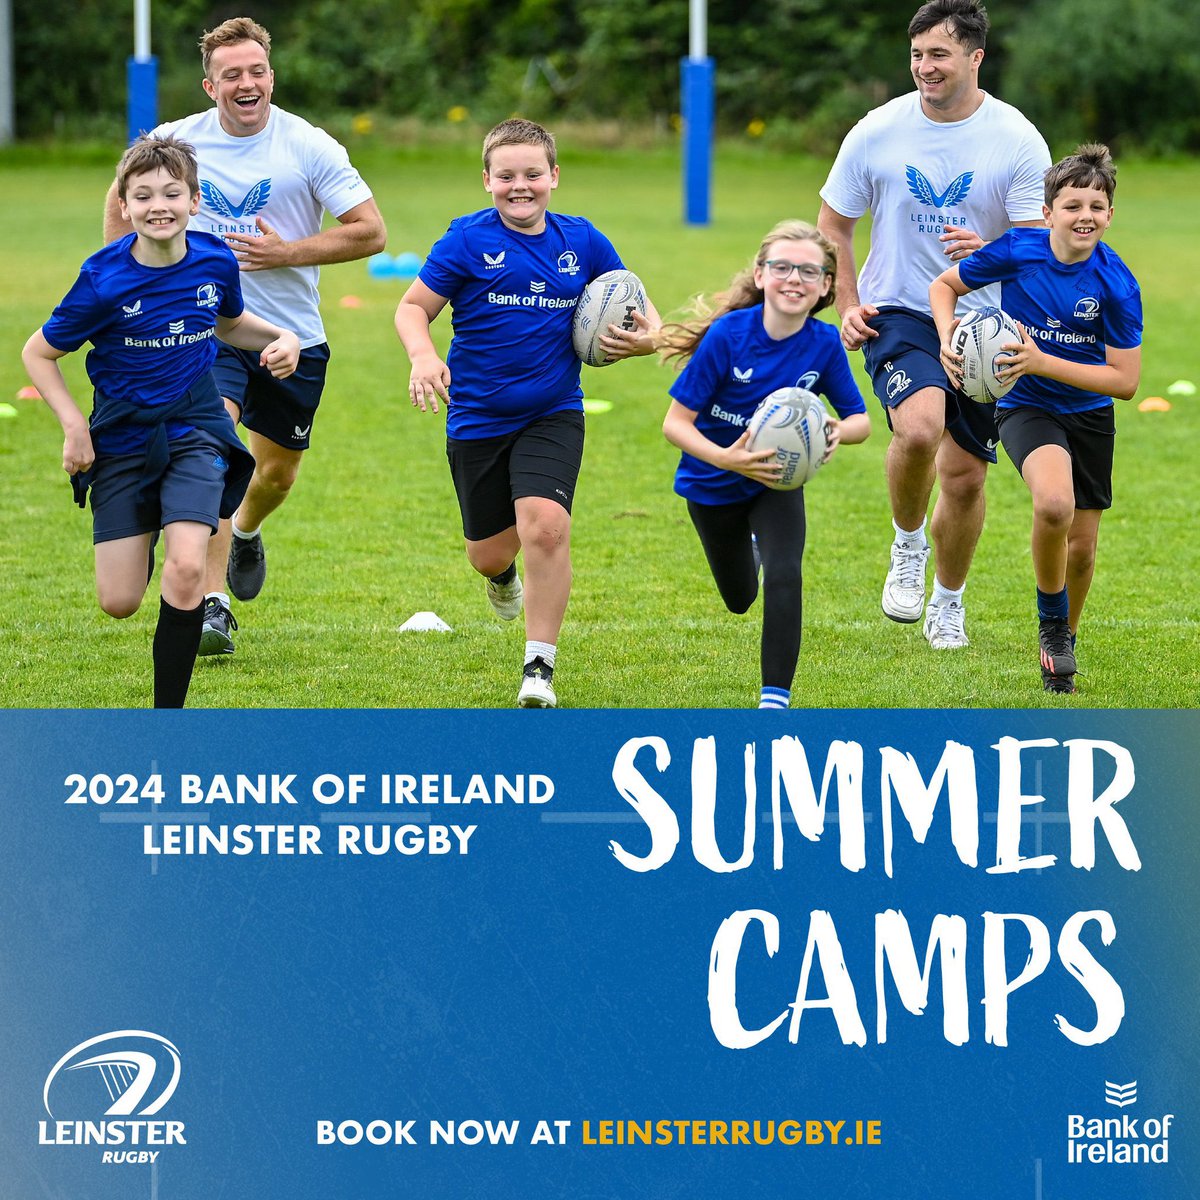 𝐒𝐮𝐦𝐦𝐞𝐫 𝐂𝐚𝐦𝐩 𝐁𝐨𝐨𝐤𝐢𝐧𝐠𝐬 𝐍𝐨𝐰 𝐎𝐩𝐞𝐧!!
 
Booking is now open for the 2024 @bankofireland #LeinsterRugby Summer Camps
 
Book here 👉bit.ly/3JdqDxC
 
#FromTheGroundUp